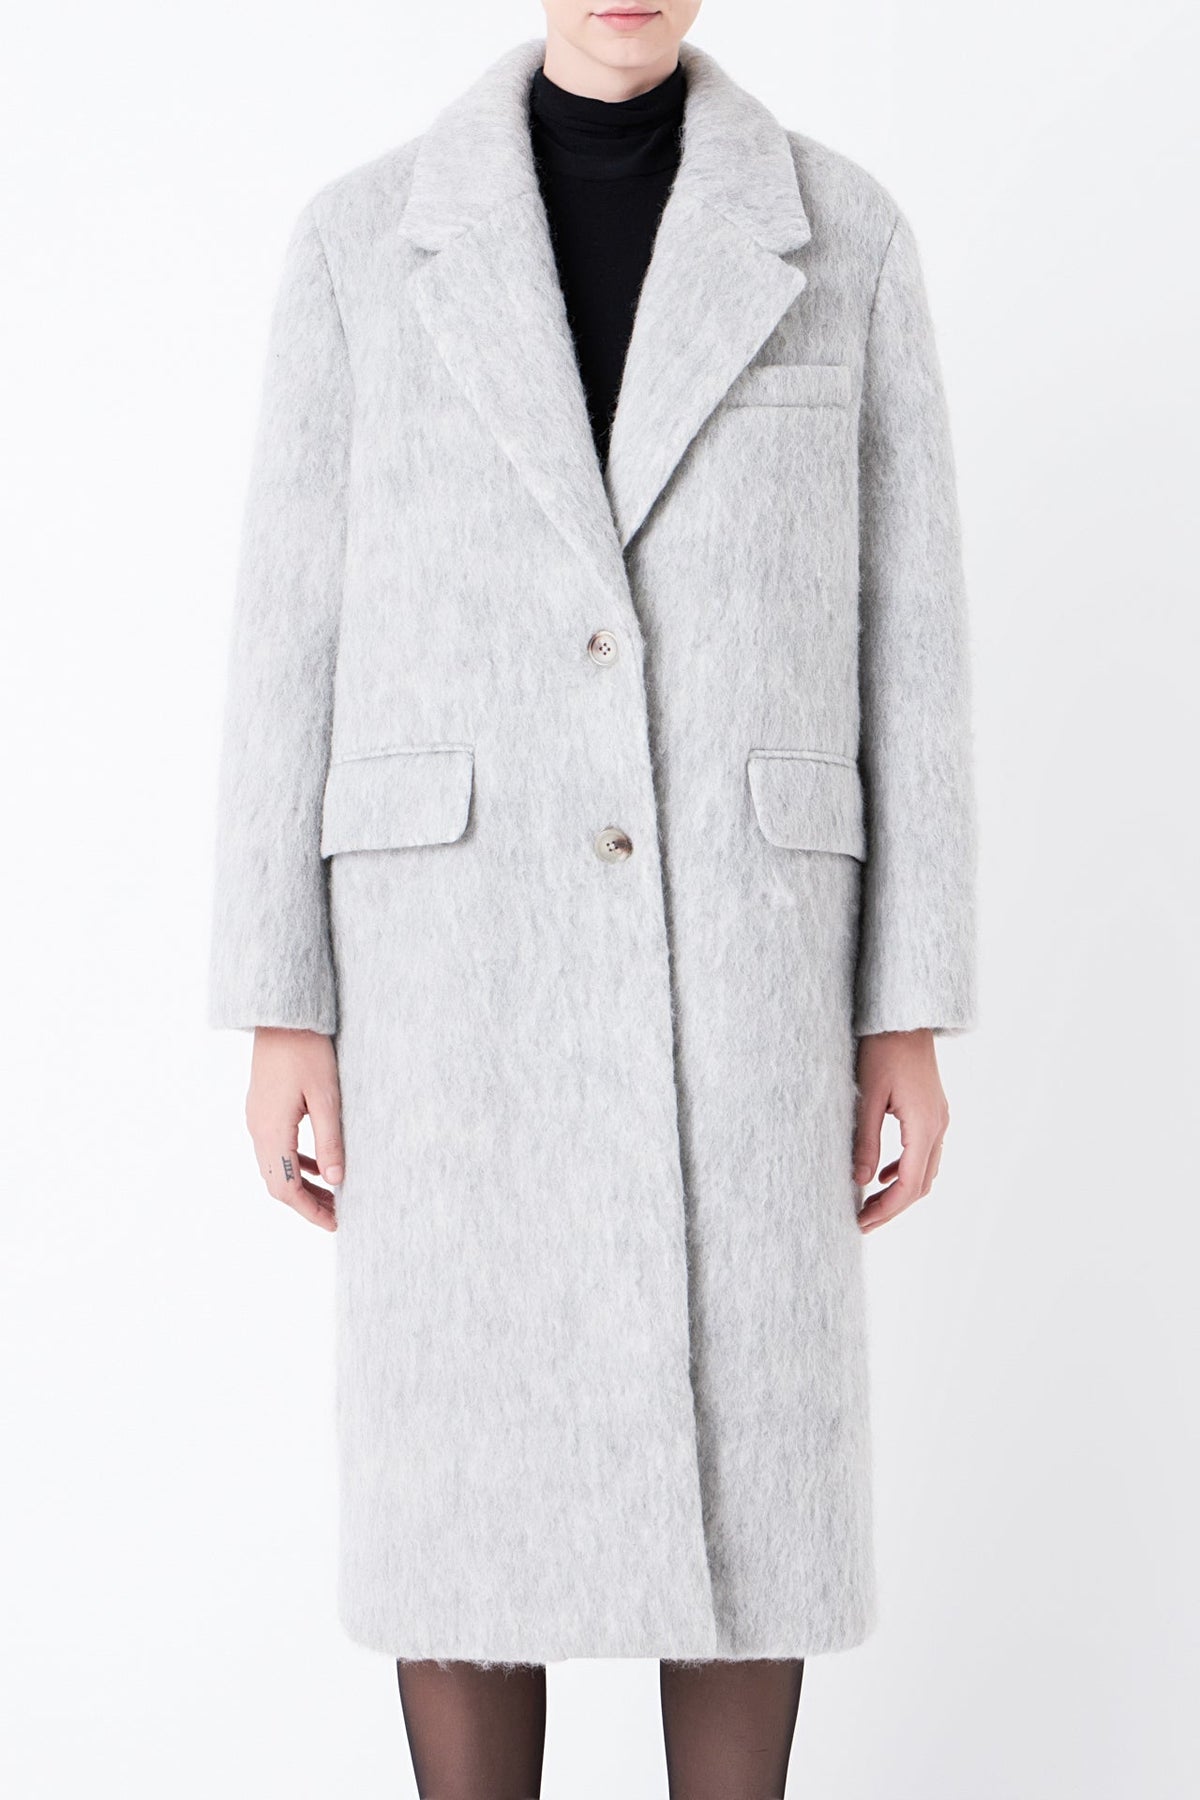 GREY LAB - Oversize Single-breasted Long Coat - COATS available at Objectrare